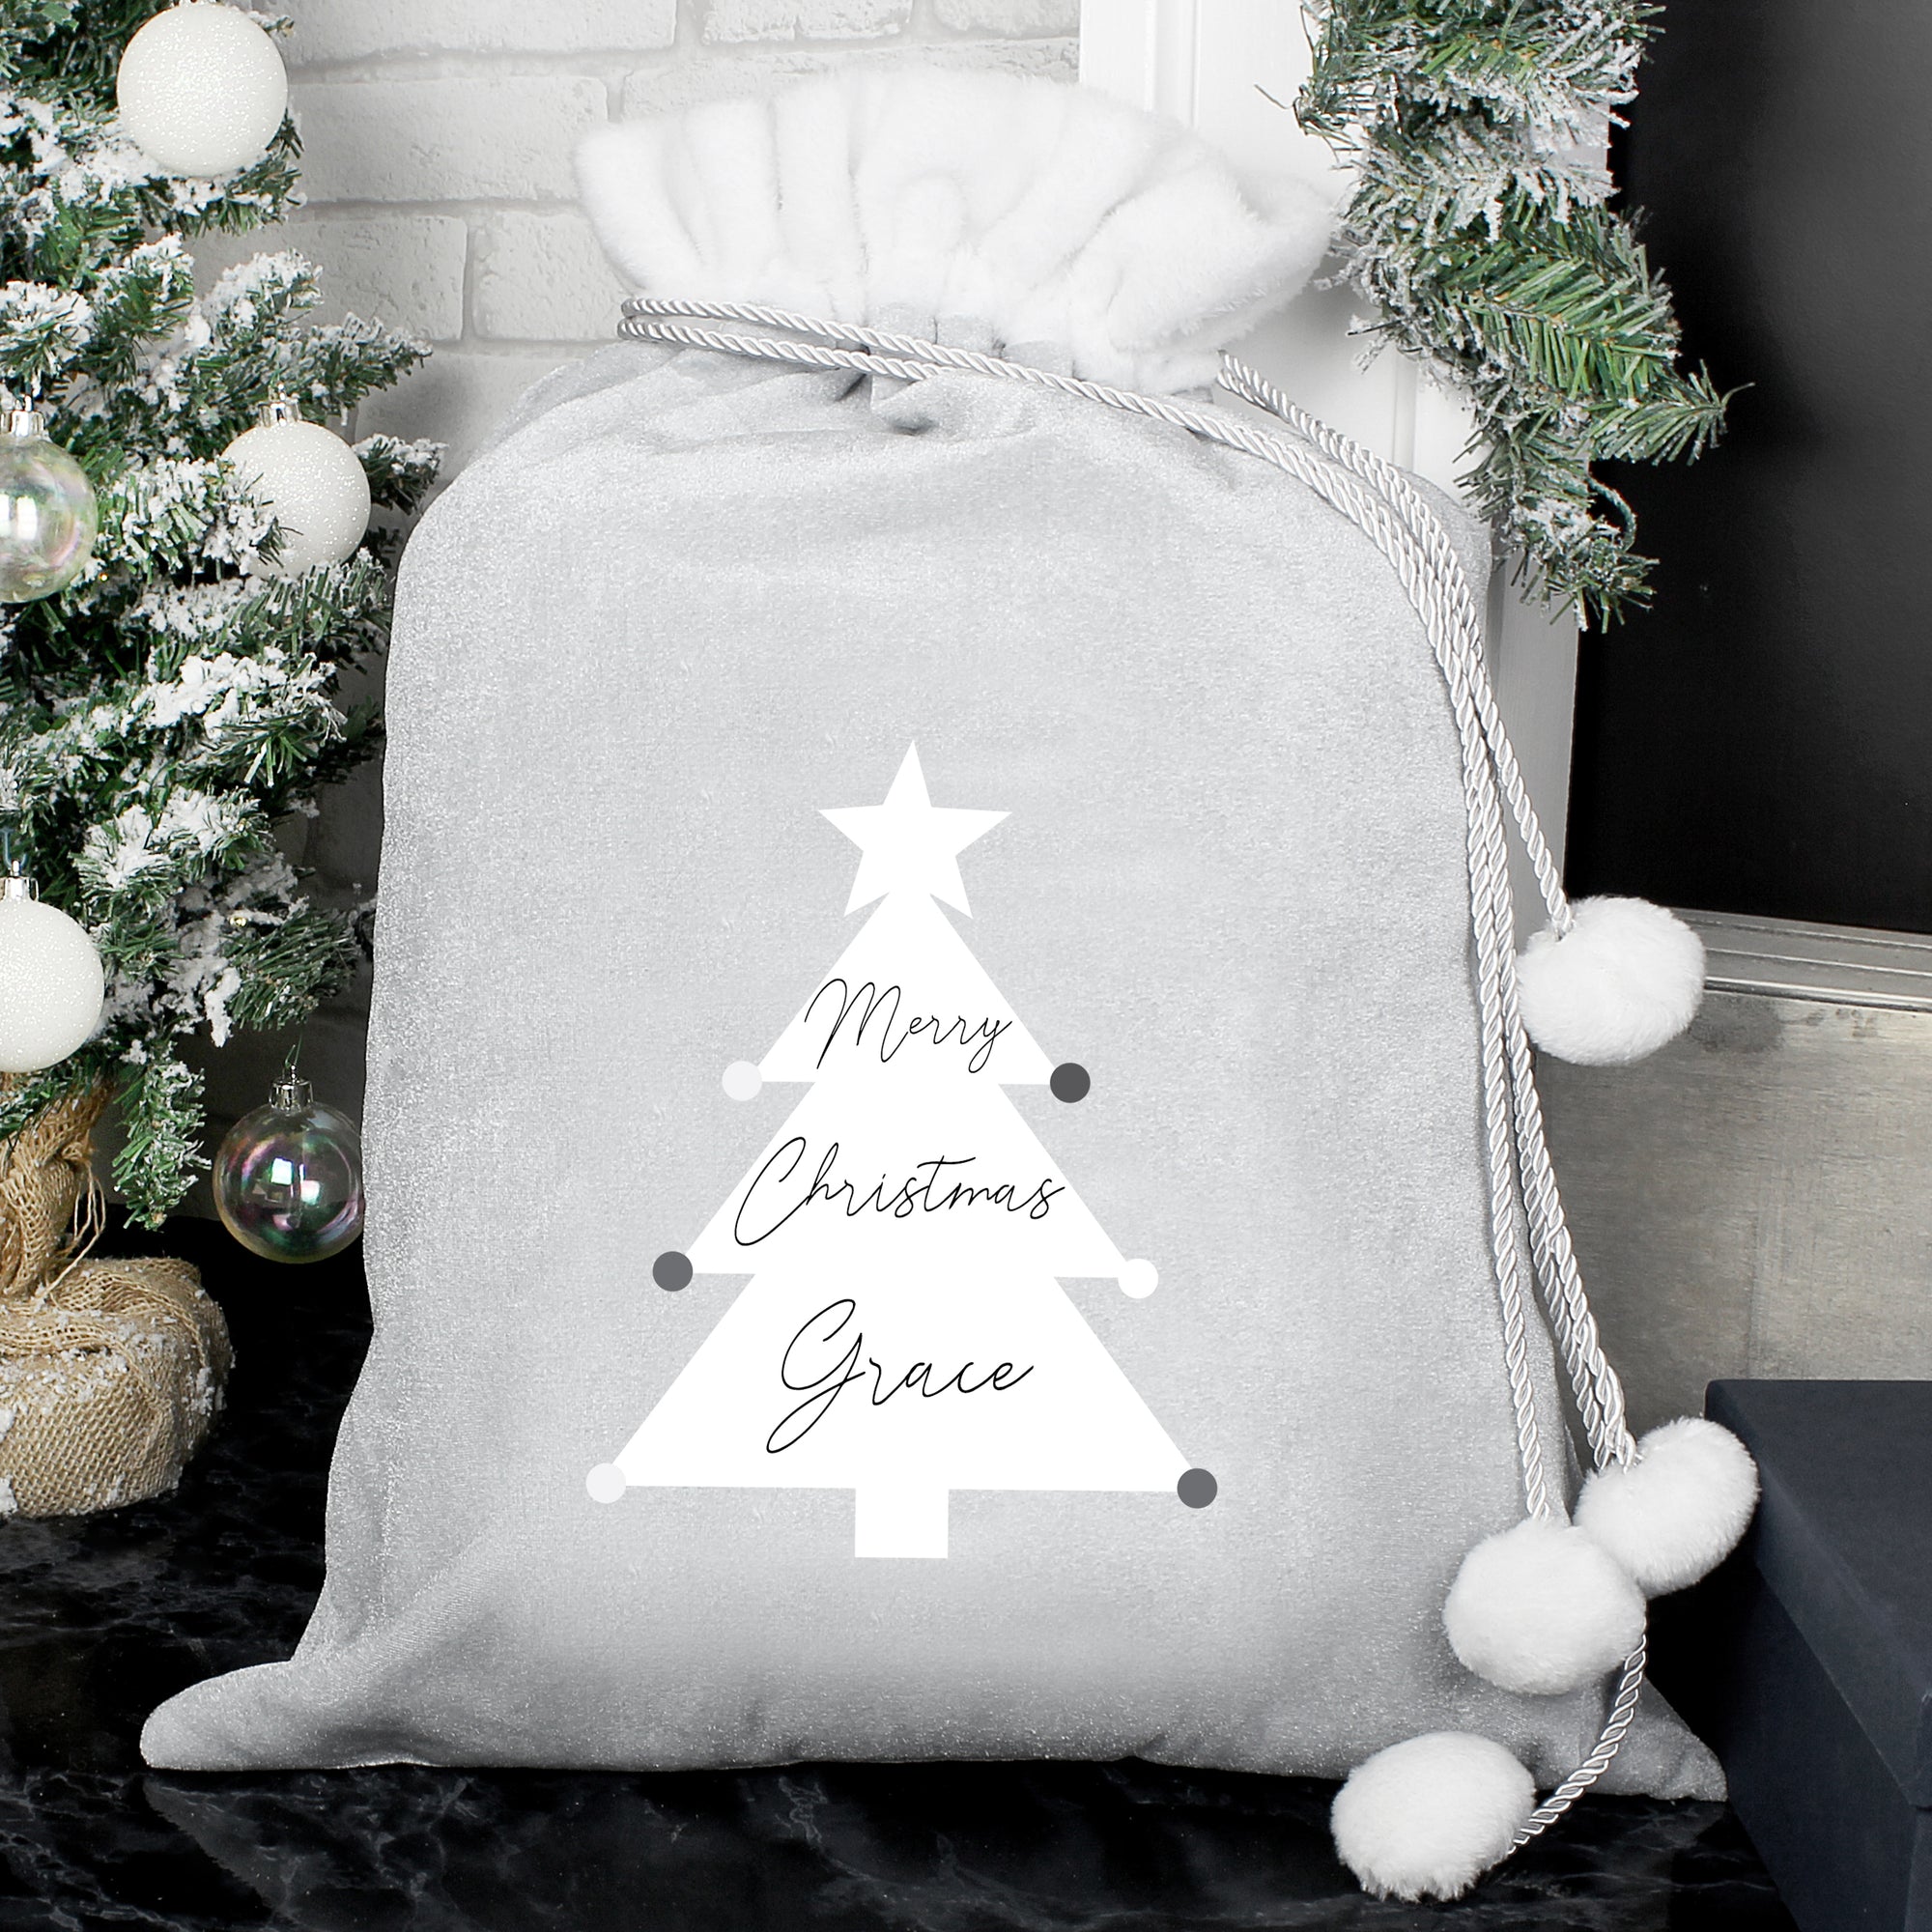 Personalised grey Christmas present sack with a white fur trim and white drawstrings with pom poms on the end to close the sack. The front of the sack features an illustration of a white Christmas tree and the sack can be personalised with a name of your choice up to 12 characters long which will be printed in a black modern cursive font within the image of the tree along with the words 'Merry Christmas'.